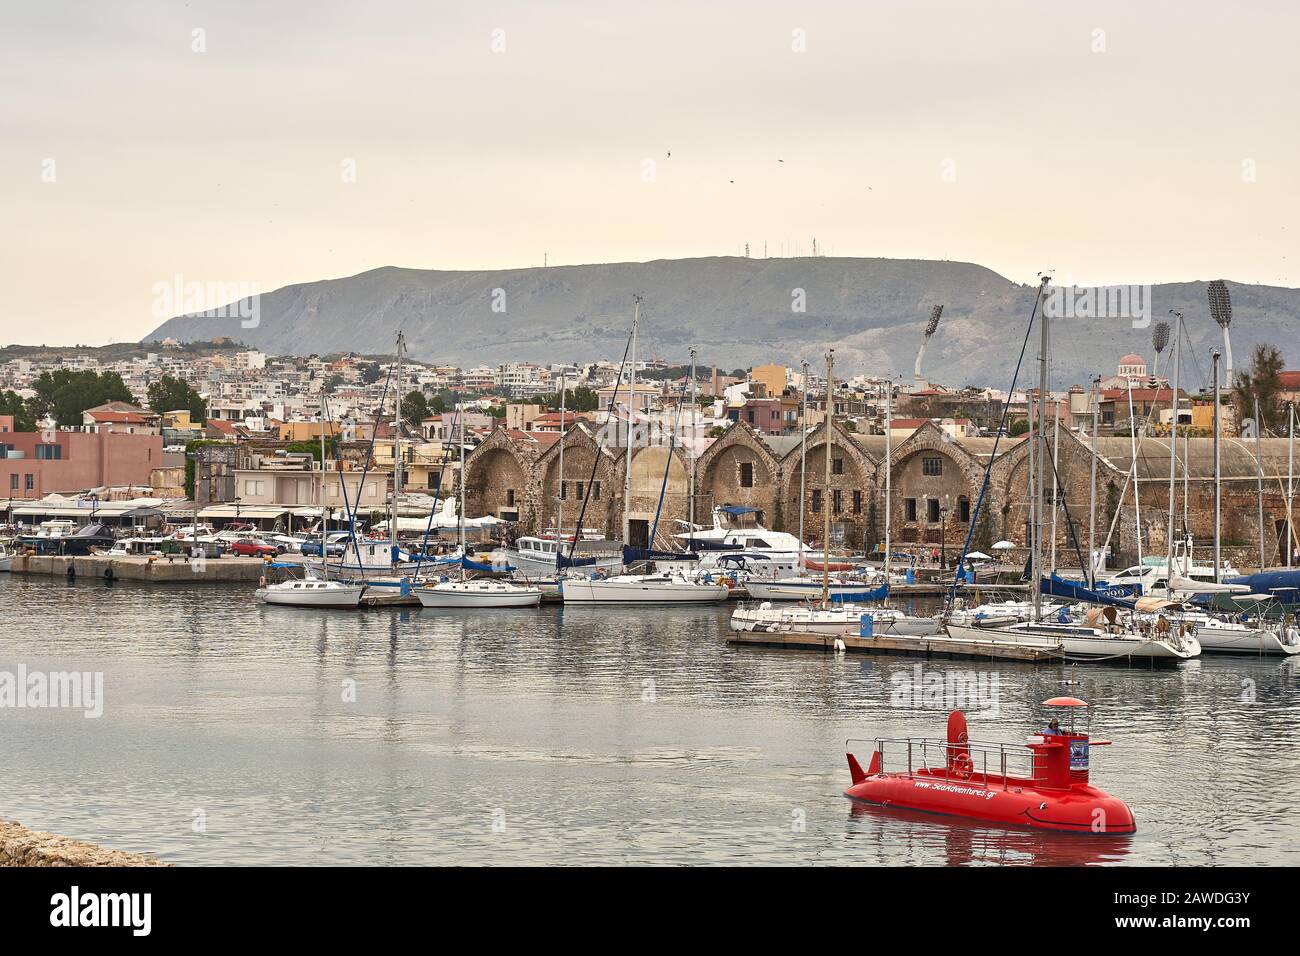 Chania, Crete, Greece. May 20: famous venetian harbour bay waterfront of Chania old town, Crete, Greece in summer Stock Photo